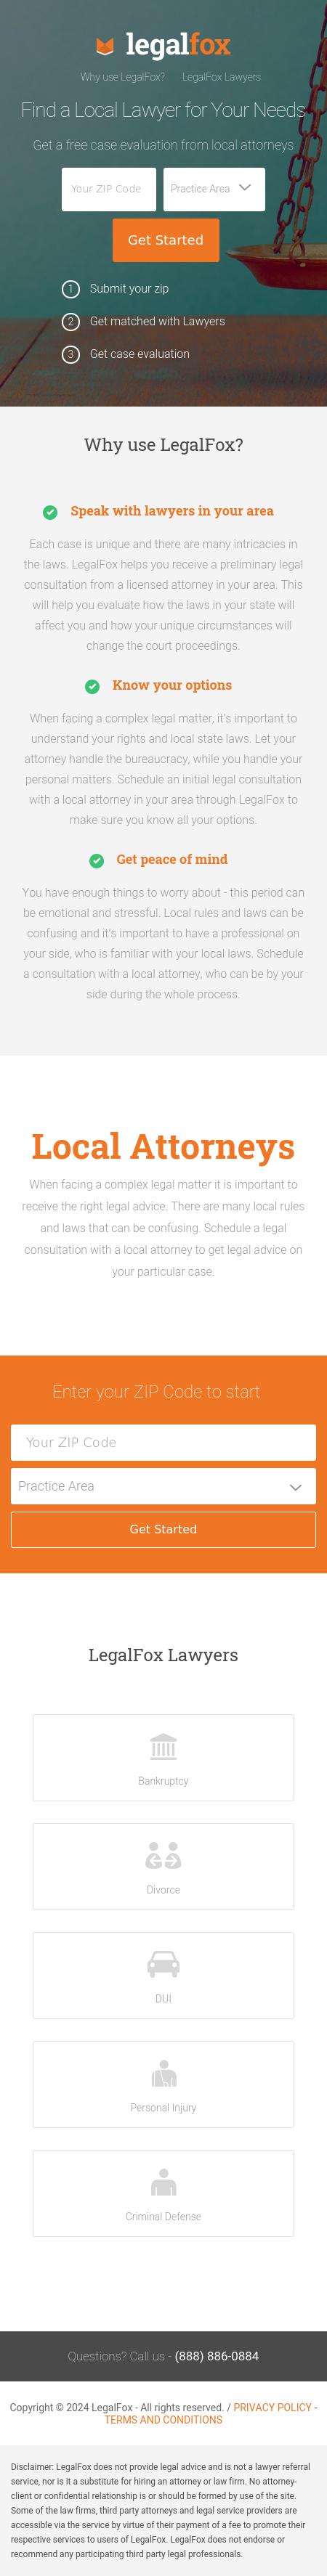 Find a Local Attorney - Waterbury CT Lawyers